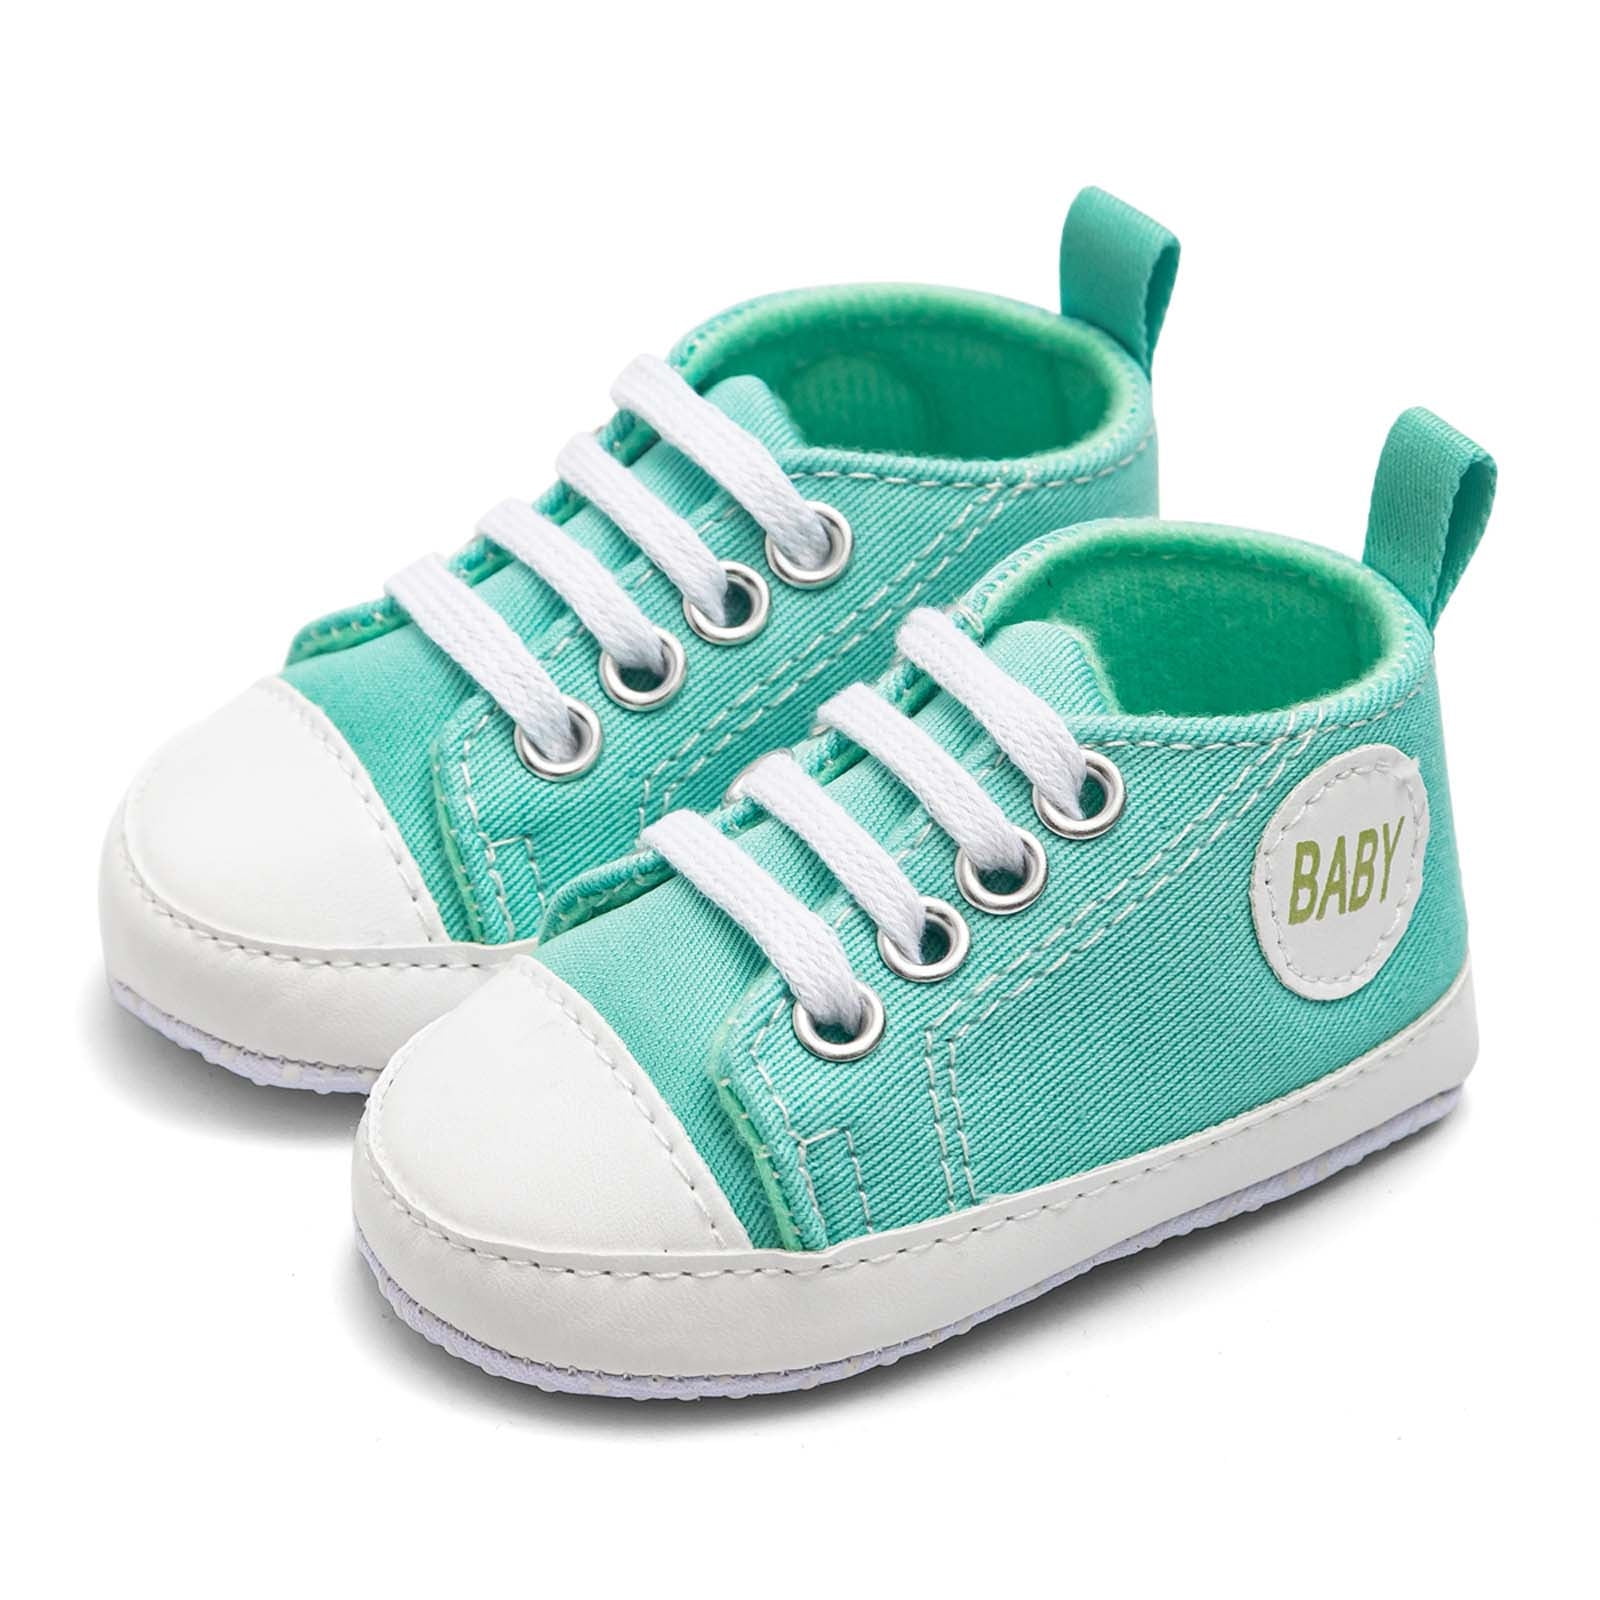 gakvbuo Clearance items all 2022!Baby Girls Boys Canvas Baby Sneakers  Infant Shoes Soft Sole High-Top Ankle Infant First Walkers Crib Shoes